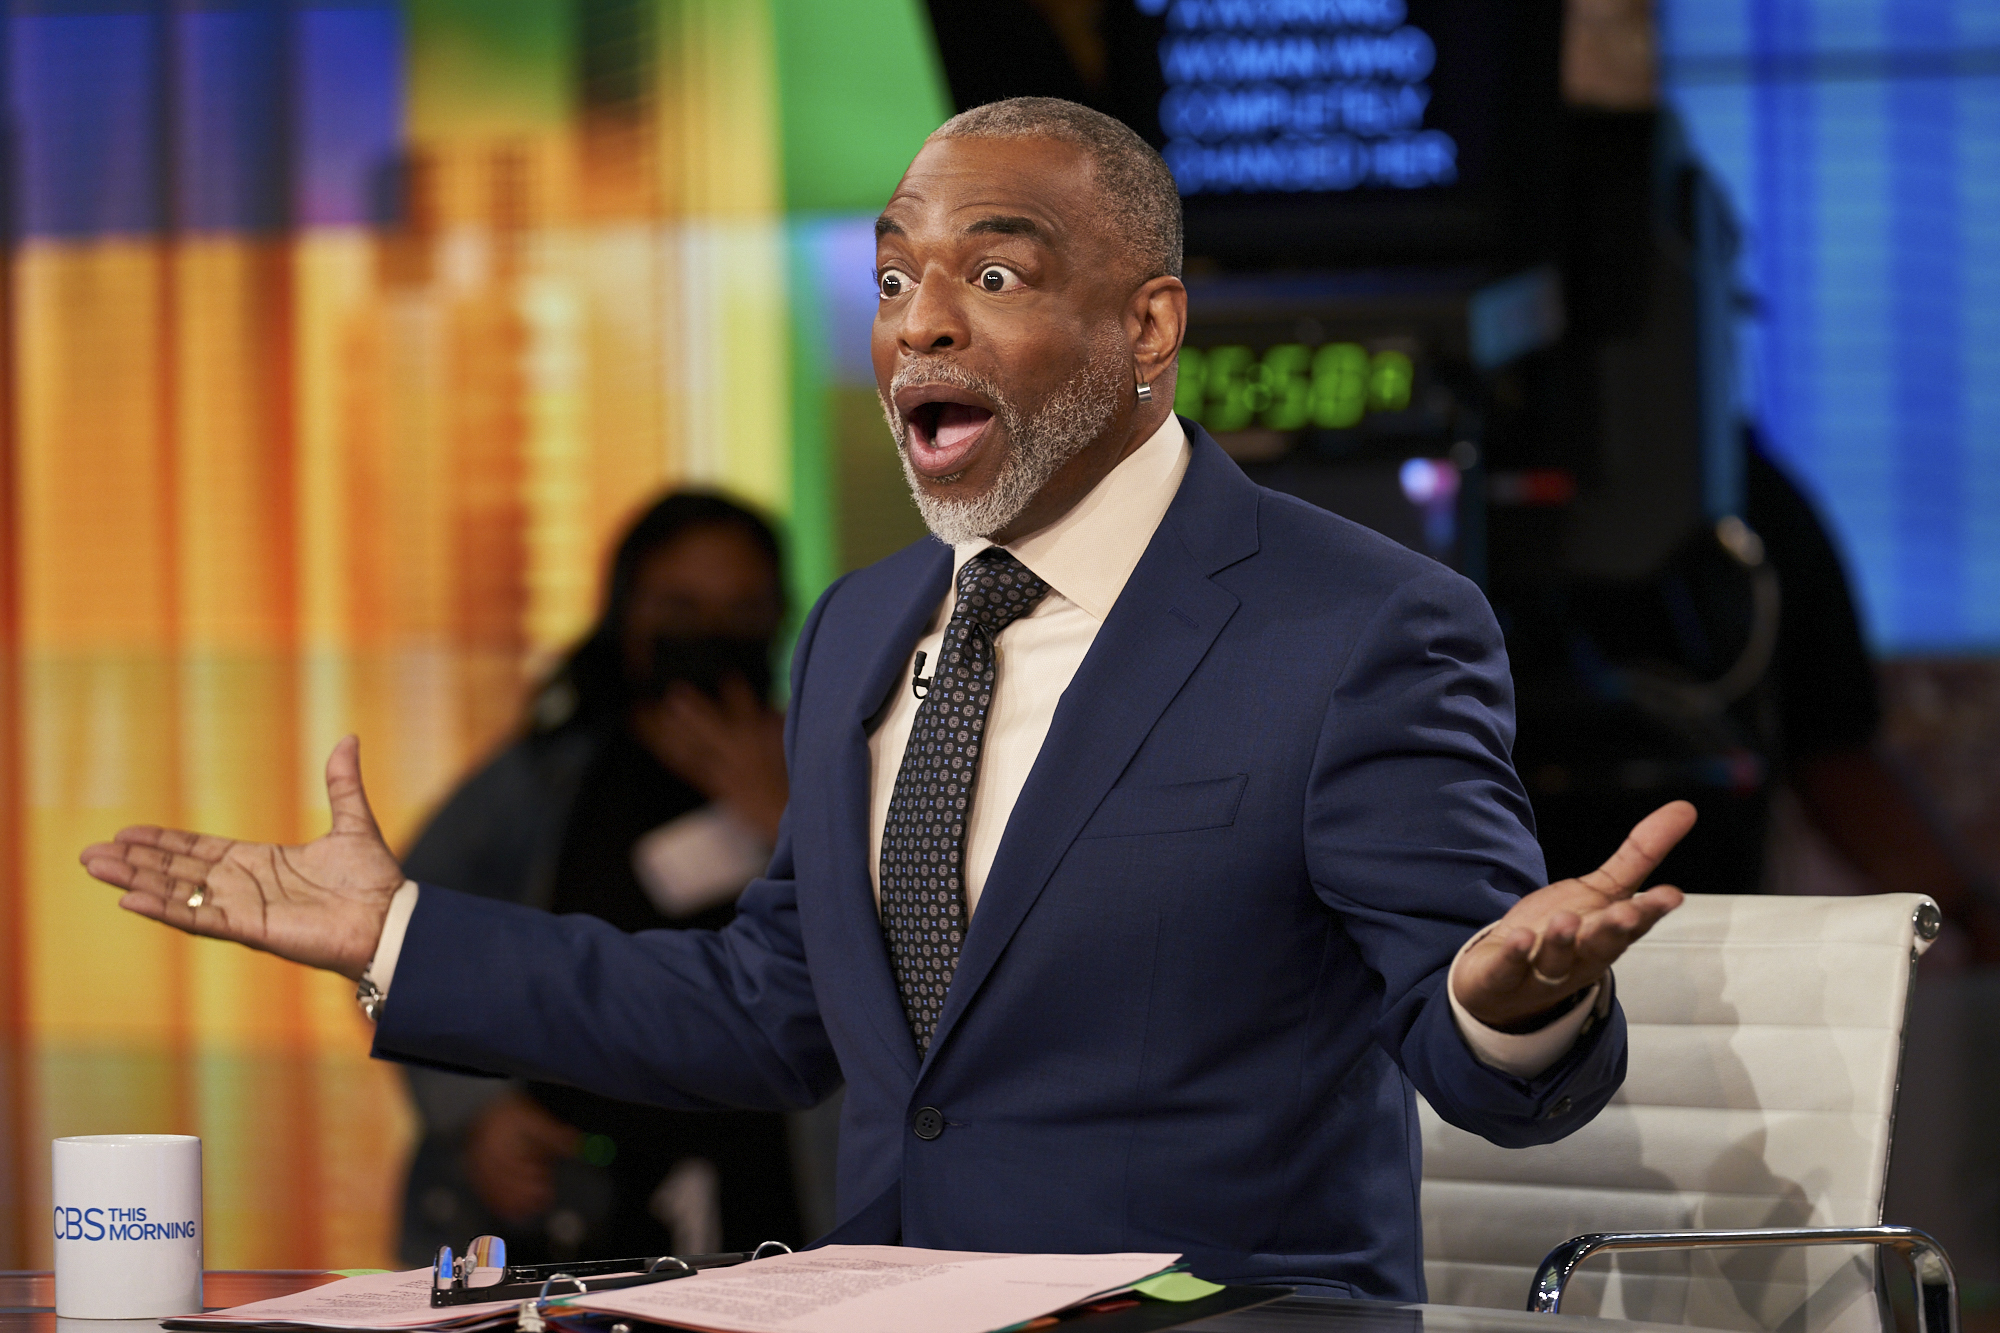 LeVar Burton joins Gayle King and Anthony Mason as a guest host on 'CBS This Morning'